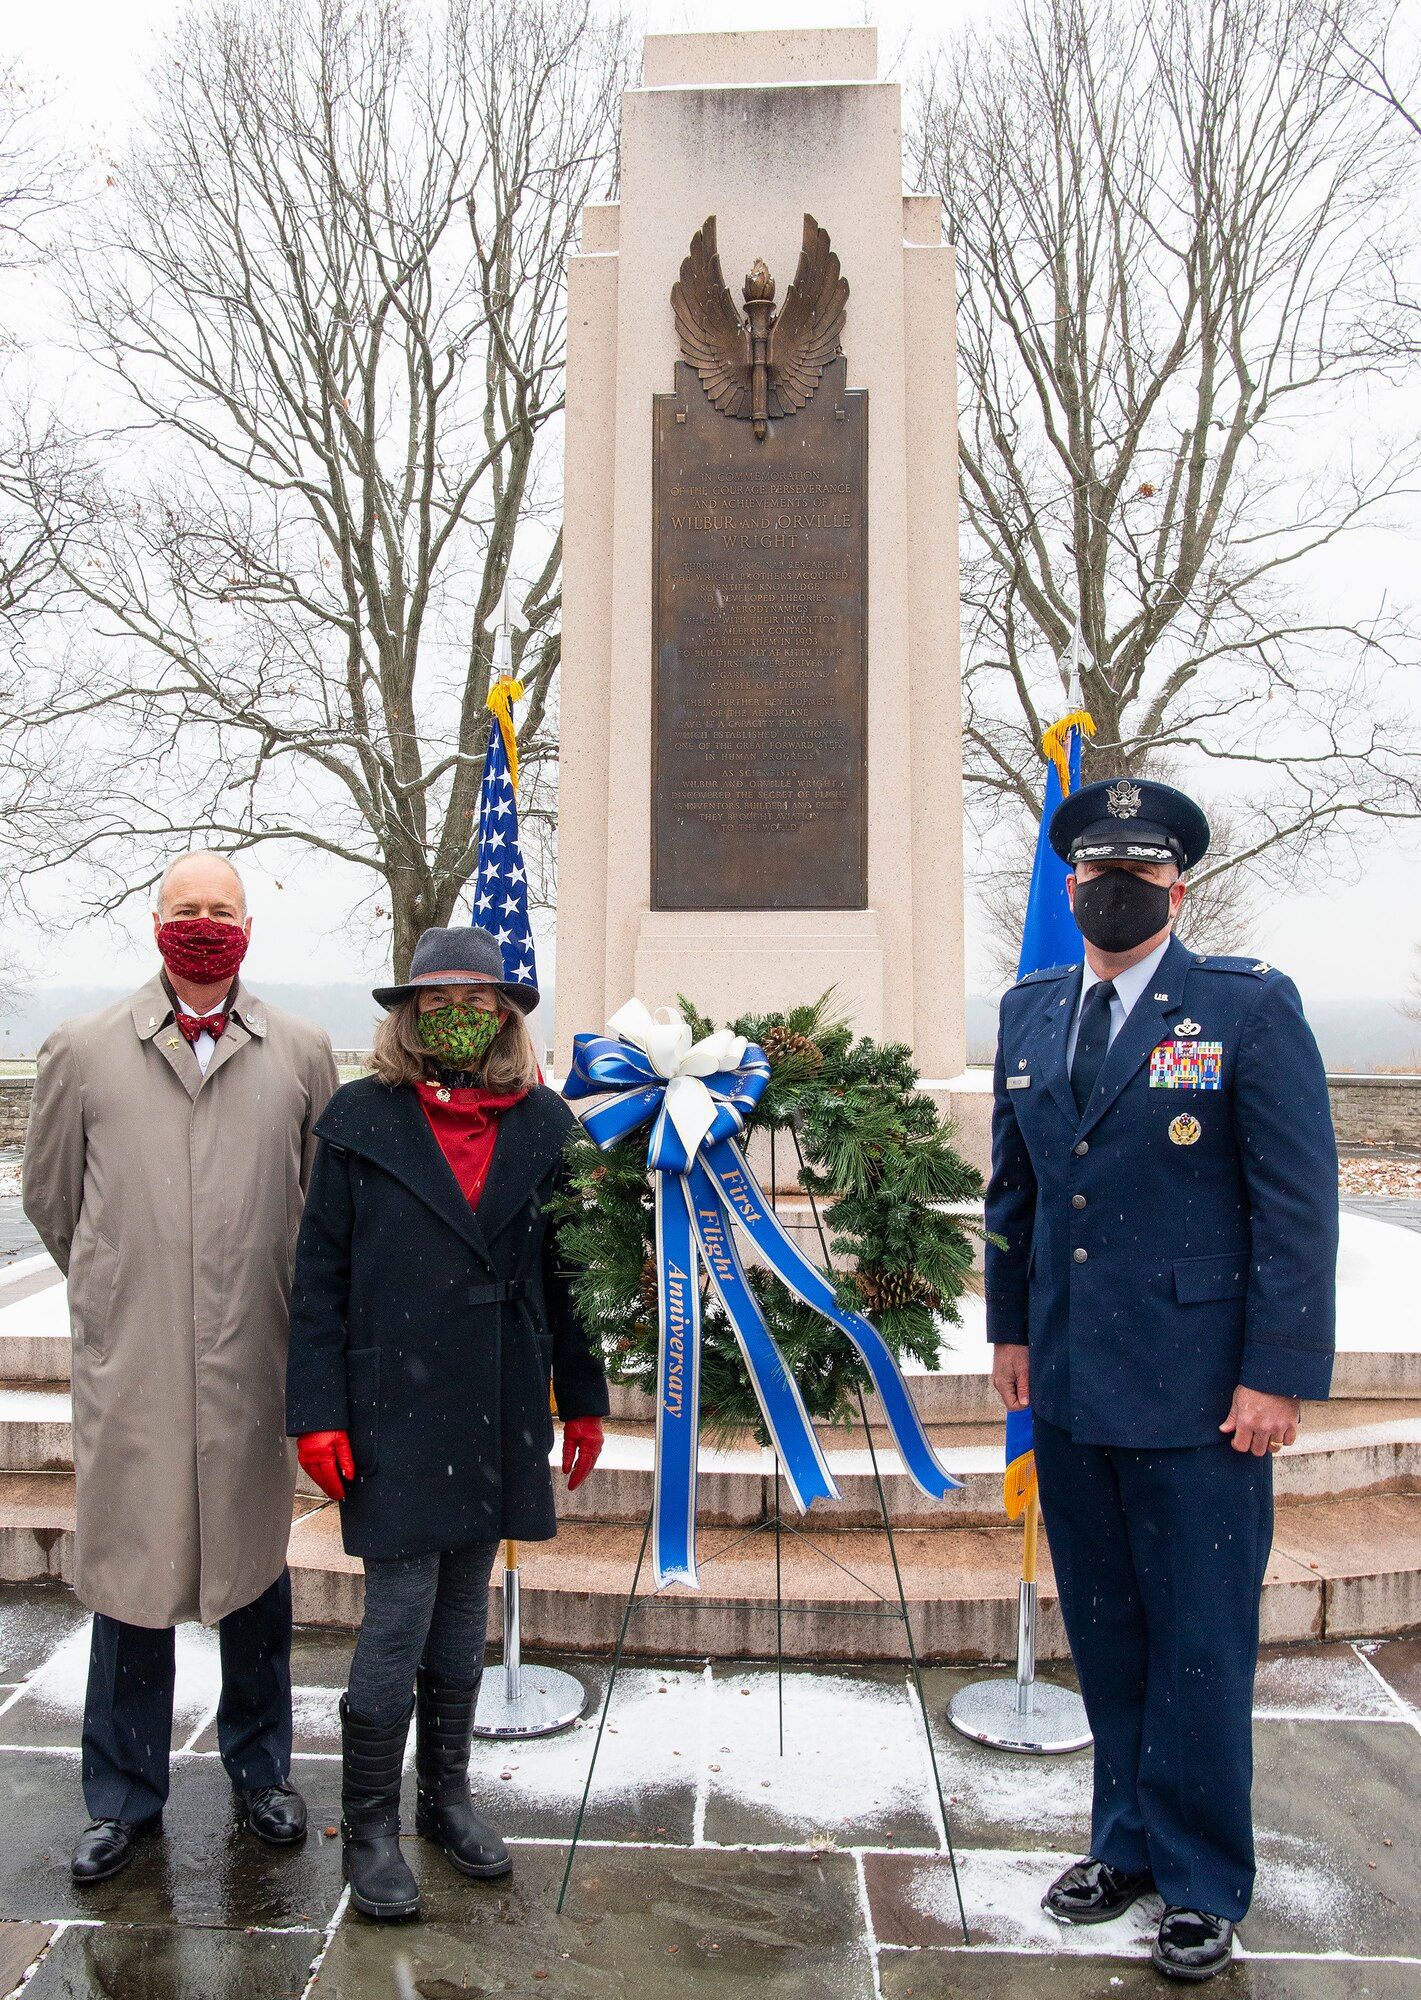 Amanda Wright Lane and Stephen Wright, great-grandniece and great-grandnephew of the Wright brothers, and Col. Patrick Miller, 88th Air Base Wing and installation commander, lay a wreath at the Wright Brothers Memorial Dec. 17, 2020, during the annual anniversary of the first flight ceremony held on Wright-Patterson Air Force Base, Ohio. The memorial overlooks Huffman Prairie where the Wright brothers taught themselves and others how to fly. (U.S. Air Force photo by R.J. Oriez)